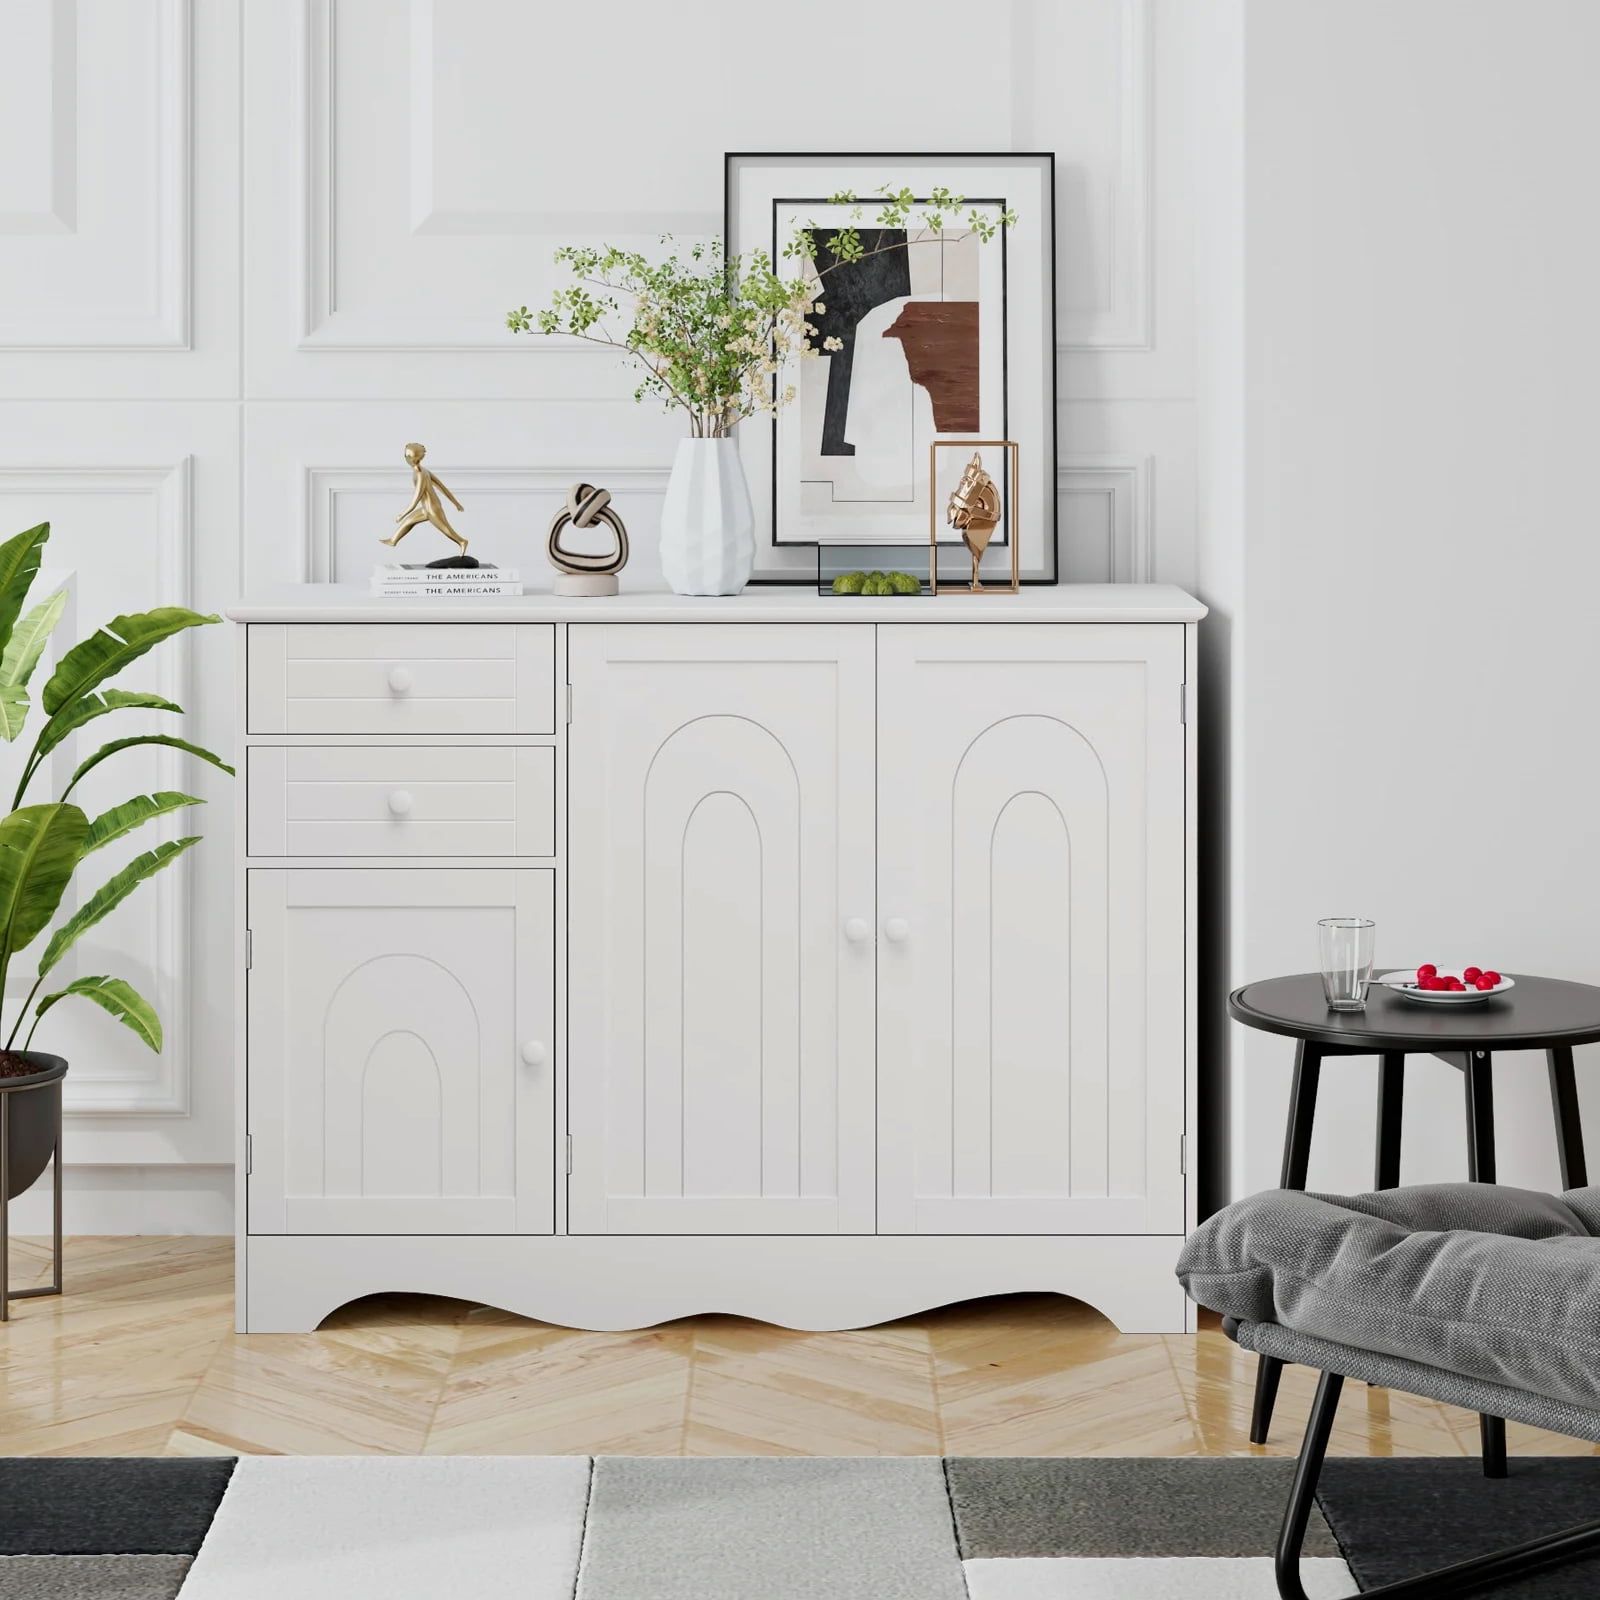 Famous Sideboard Storage Cabinet With 3 Drawers & 3 Doors Inside Homfa Kitchen Storage Cabinet, White Buffet Server Cupboard, Floor Sideboard  Cabinet With 3 Doors And 2 Drawers For Living Room – Walmart (View 6 of 15)